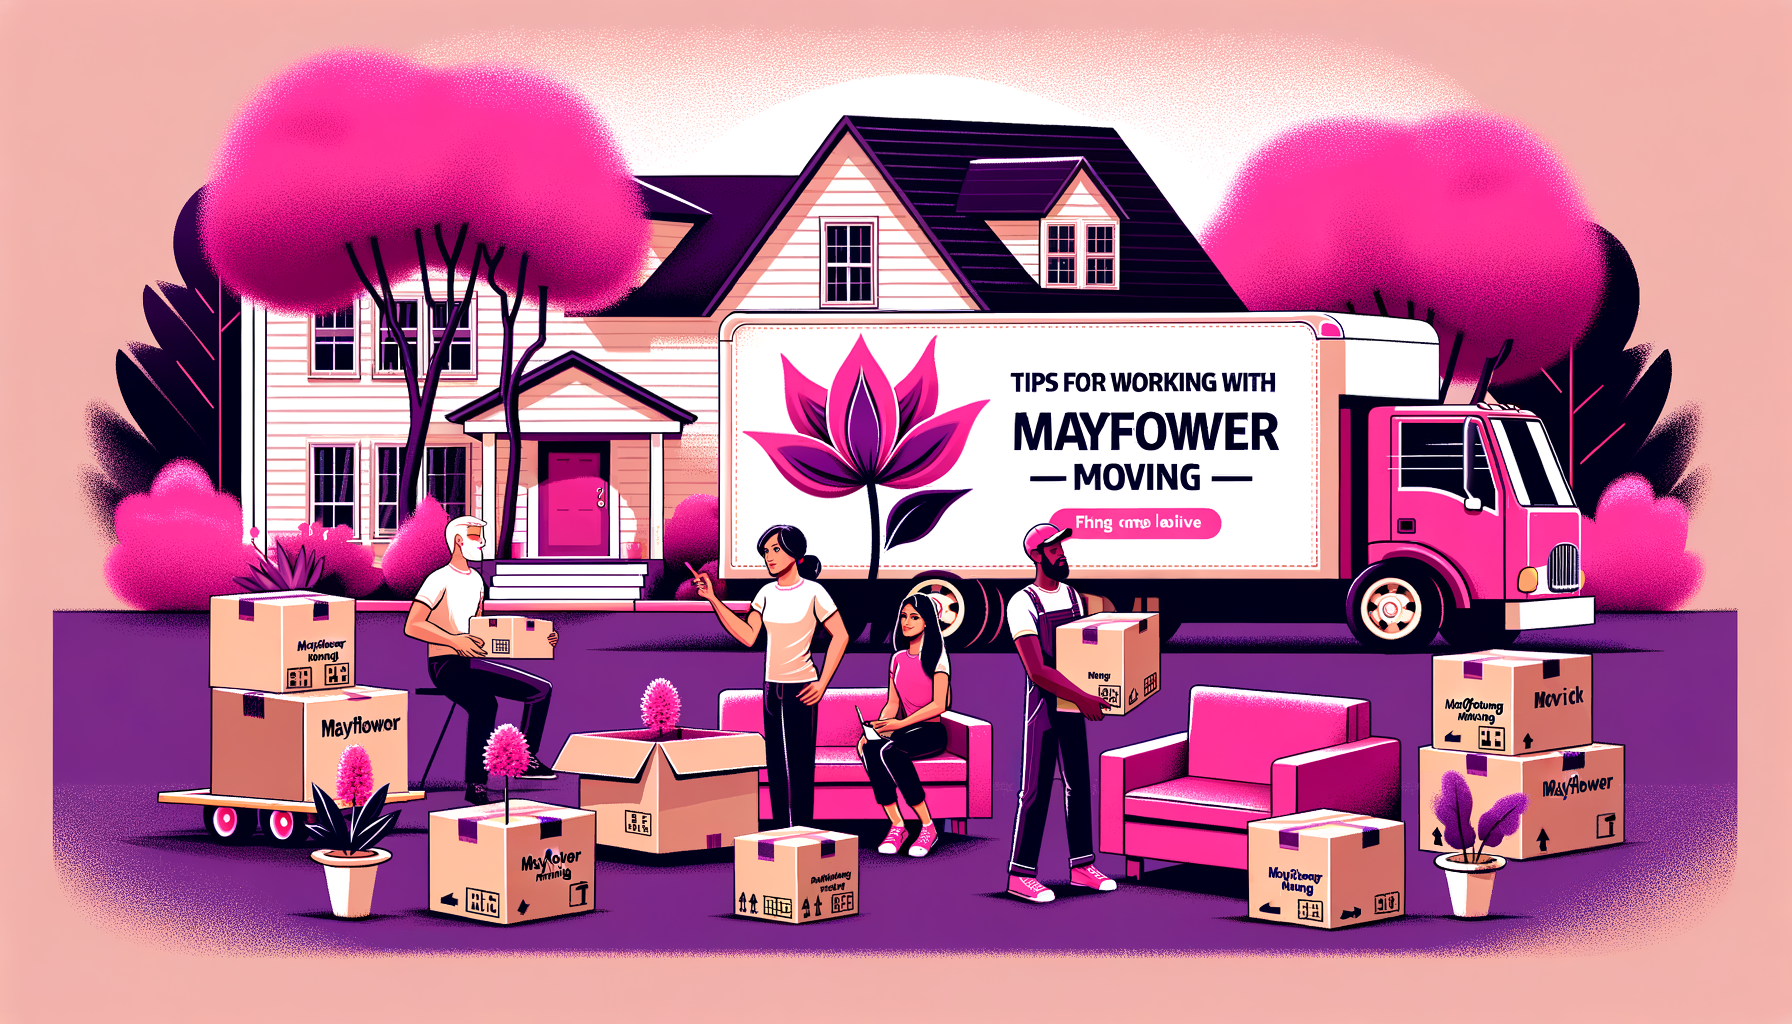 Cartoon-like fuschia colored illustration showing tips for working with Mayflower Moving, featuring boxes, a moving truck, and happy characters preparing for a move.